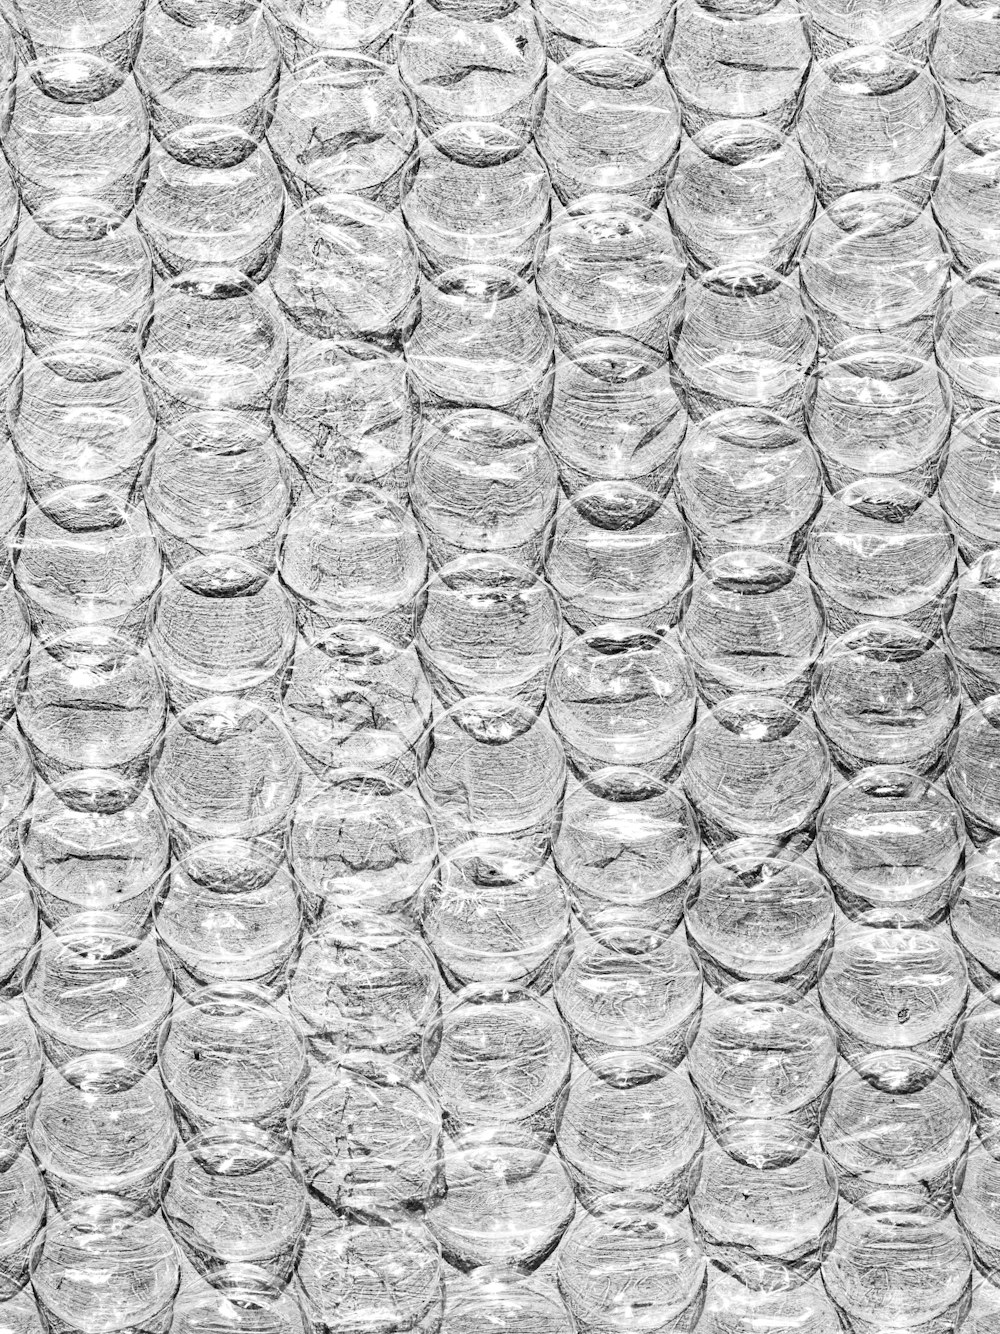 grayscale photo of water droplets on glass